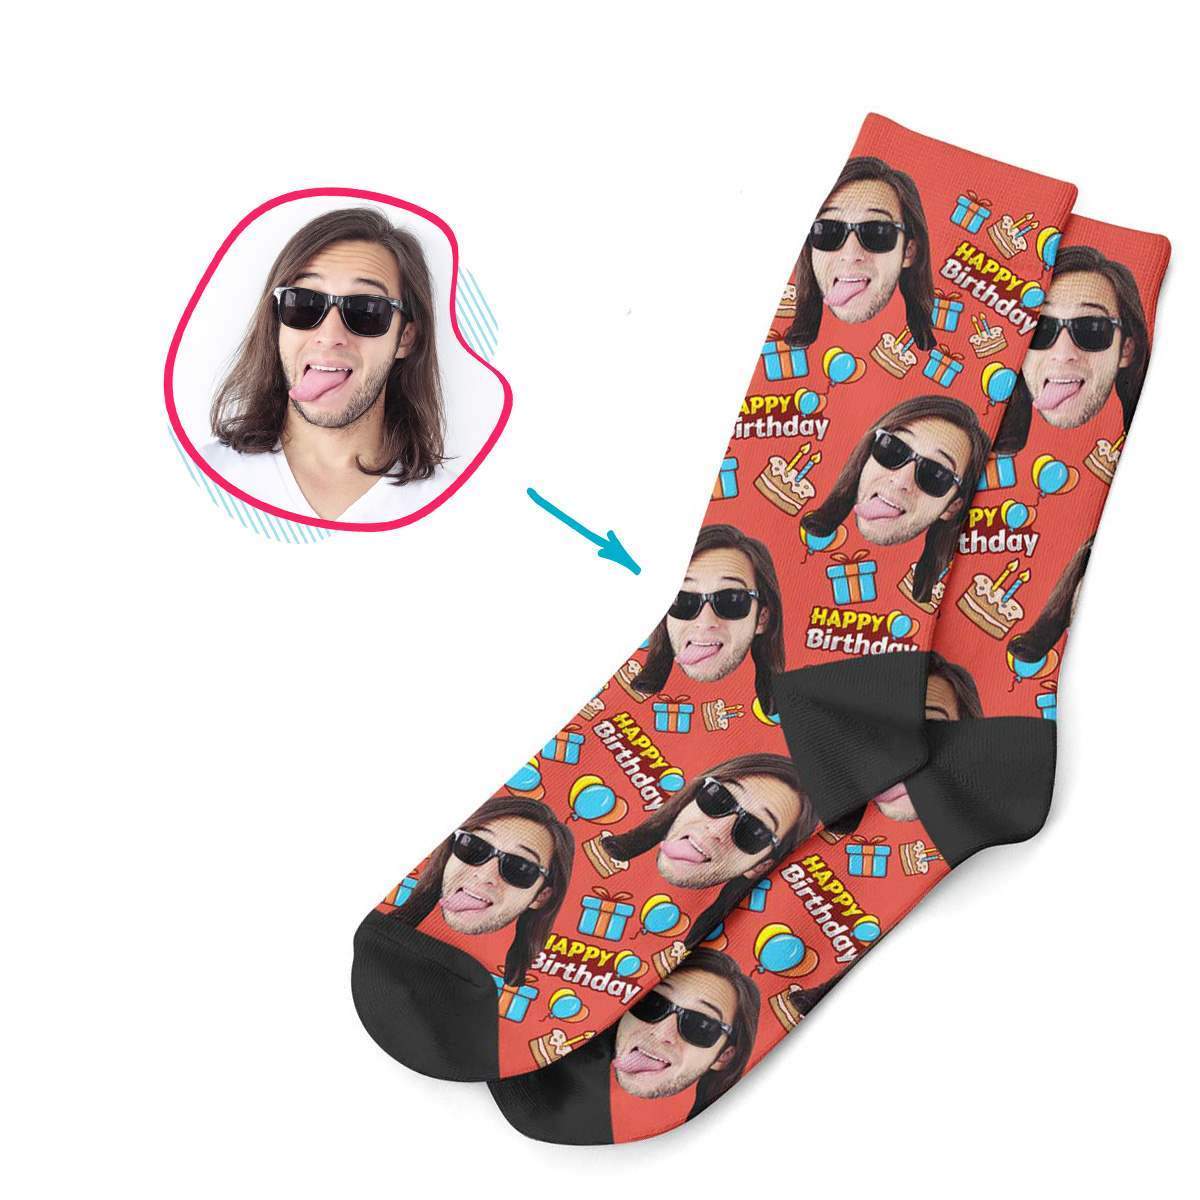 red Birthday socks personalized with photo of face printed on them